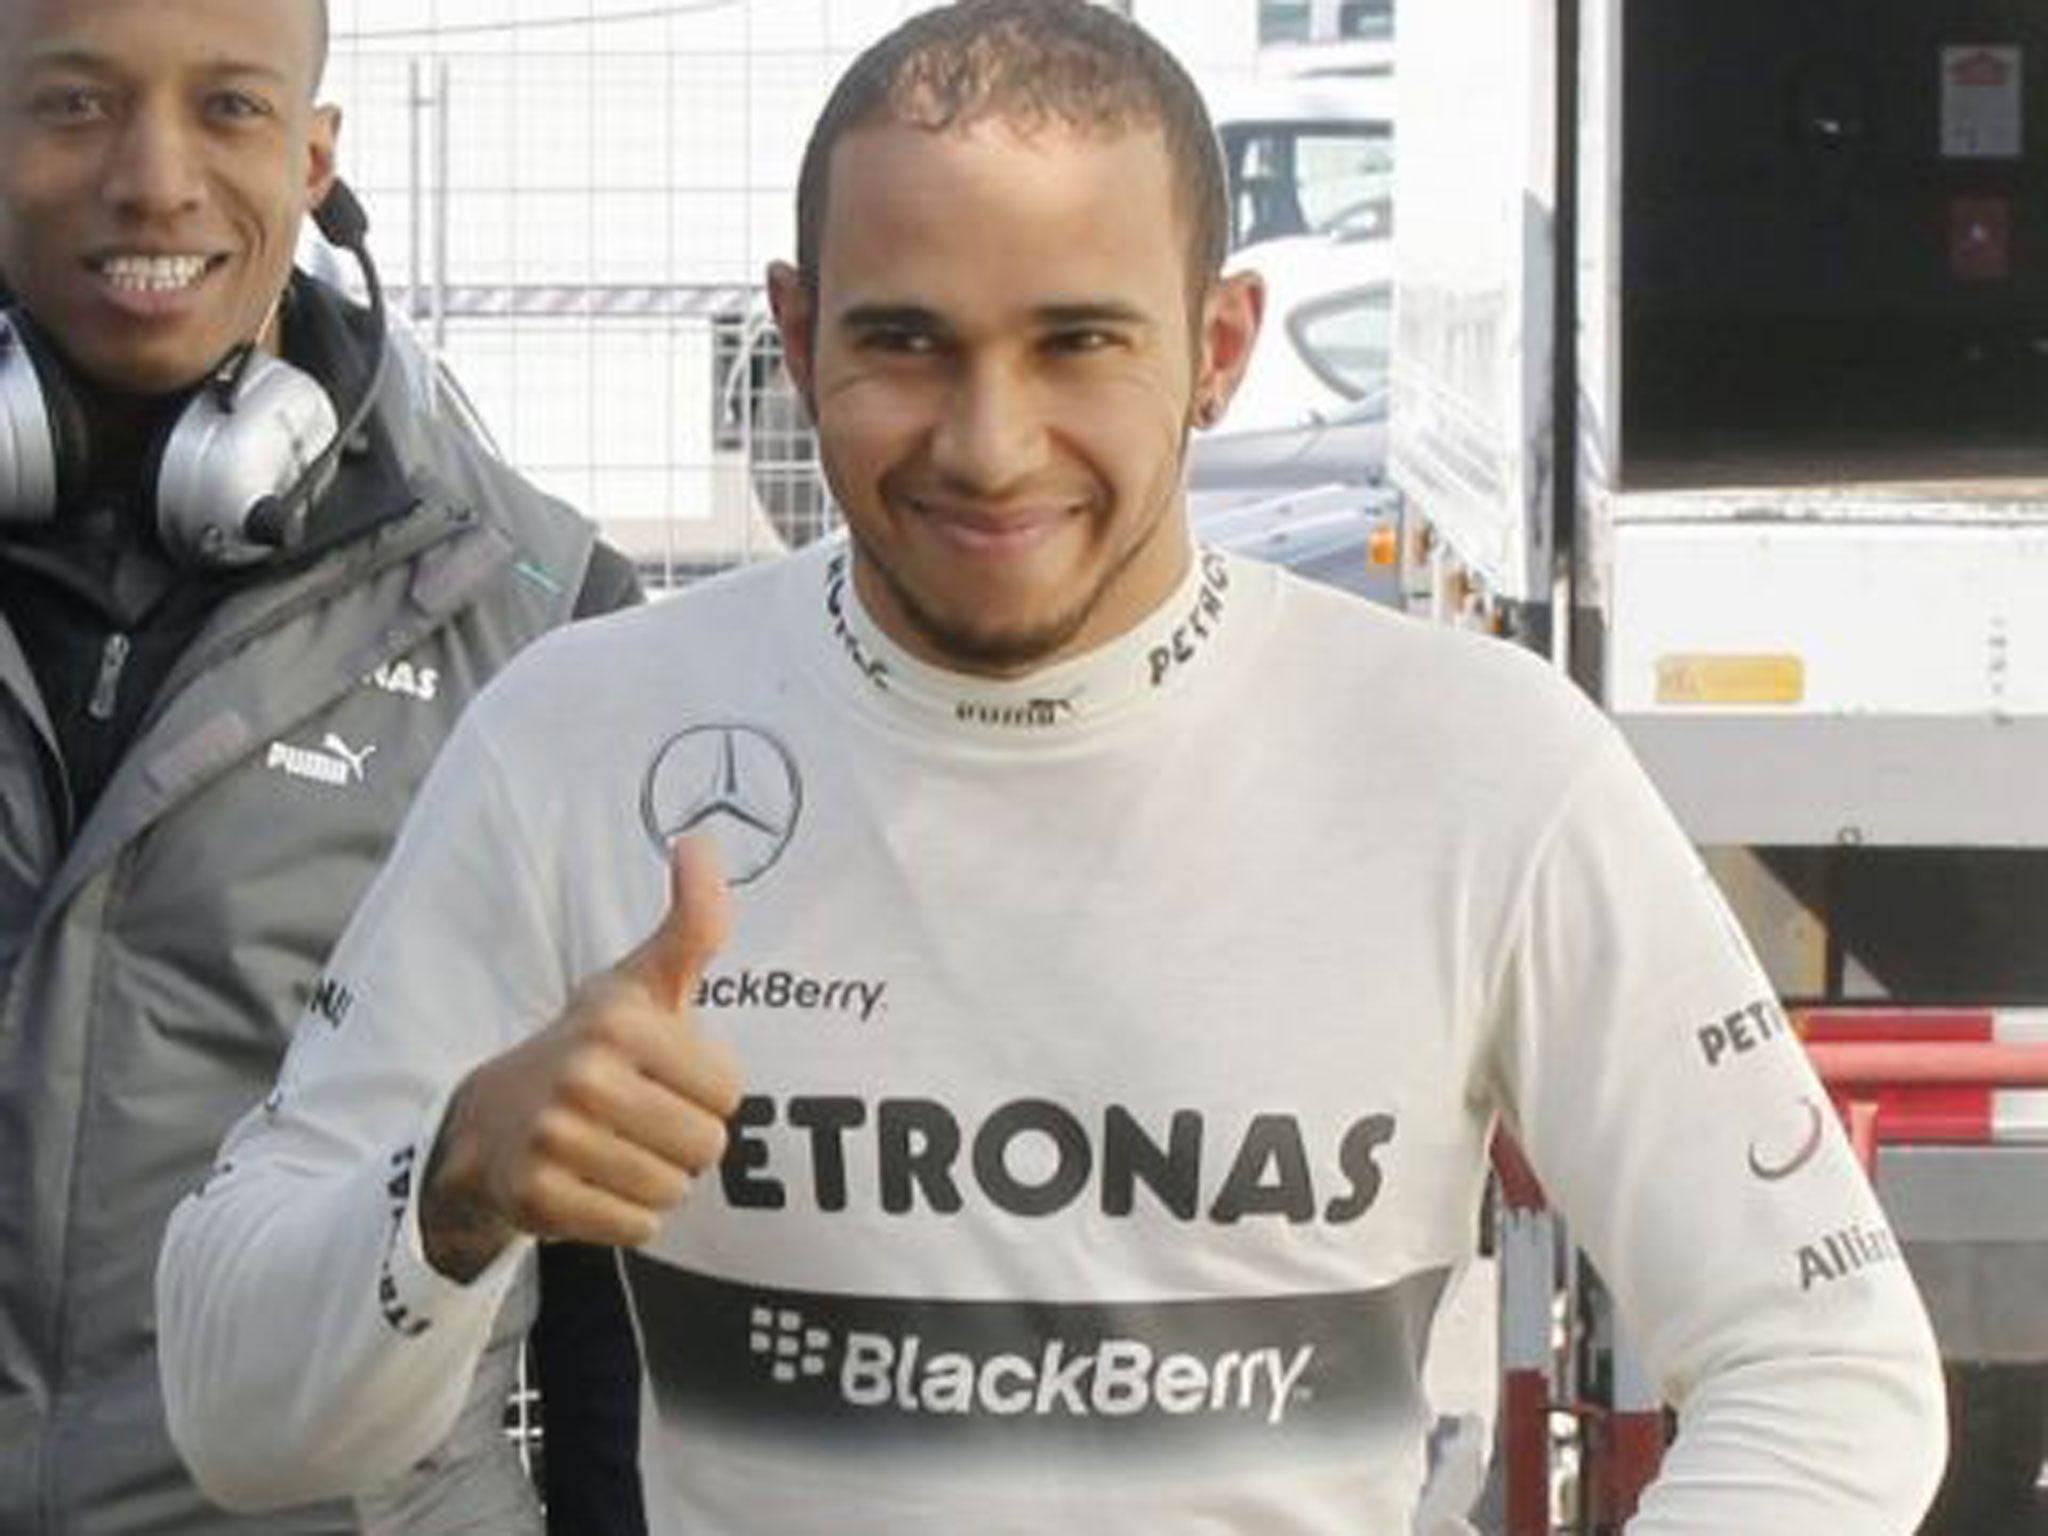 Hamilton and Rosberg fought over the title until the final race of the season in 2014